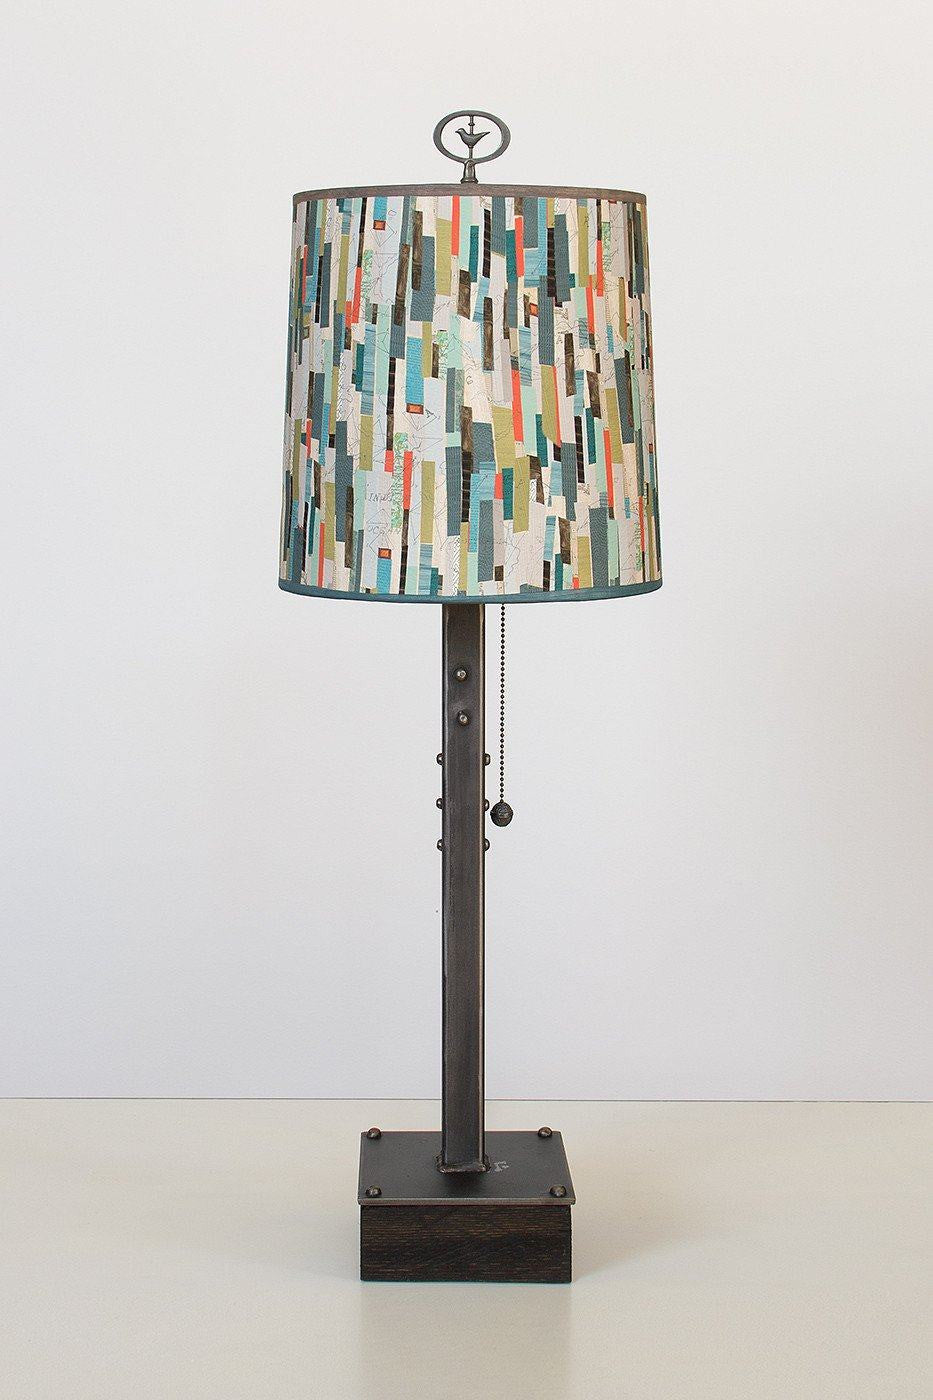 Janna Ugone & Co Table Lamps Steel Table Lamp on Wood with Medium Drum Shade in Papers